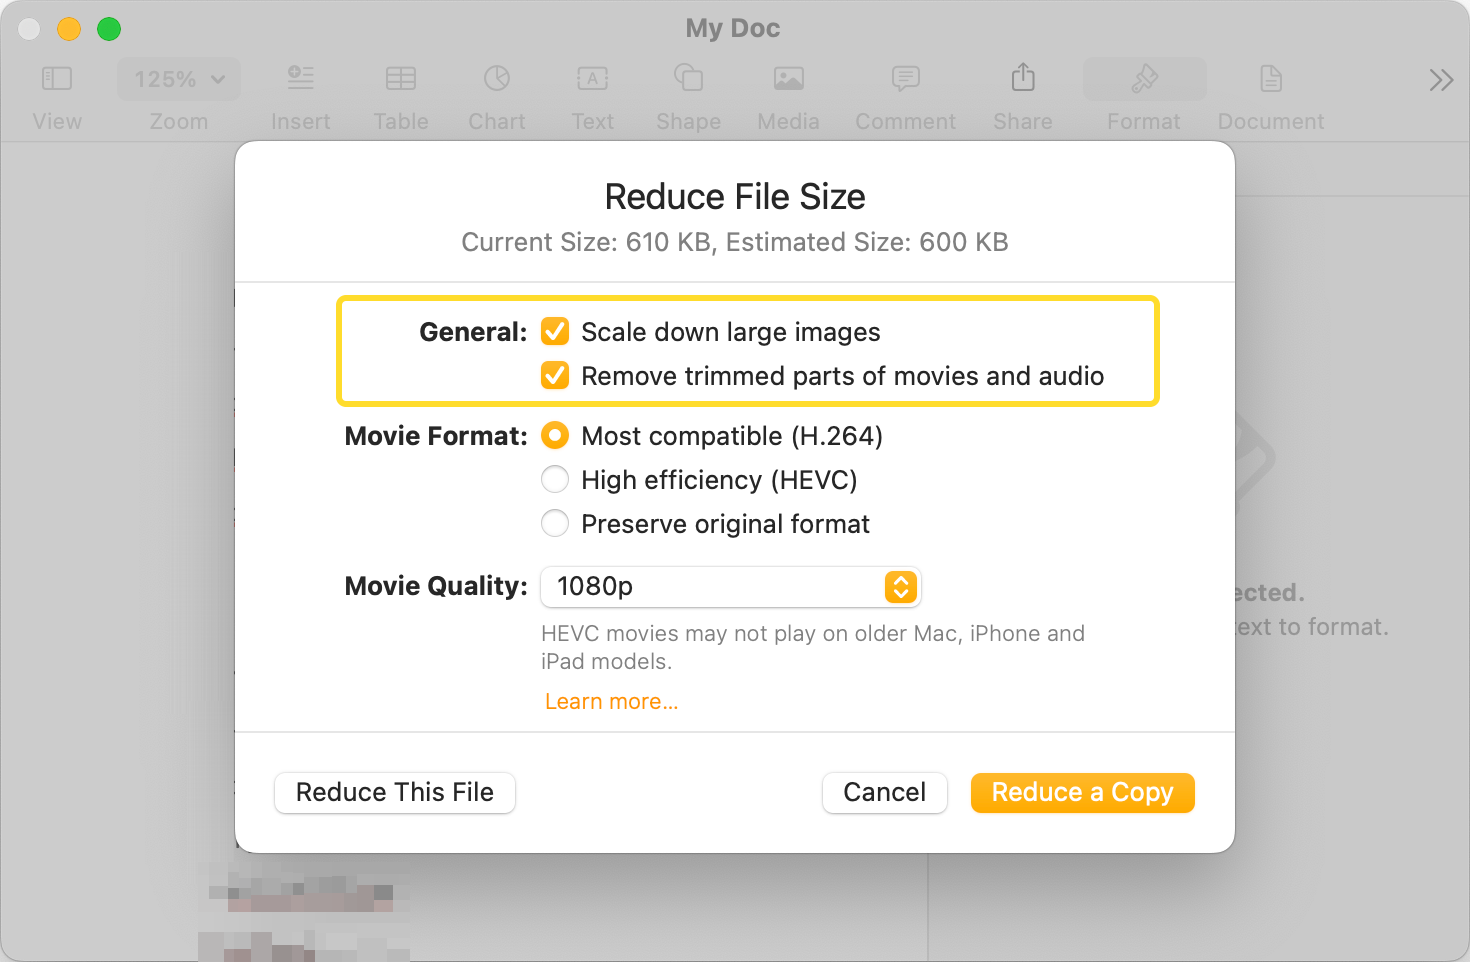 The Reduce File Size pop-up menu is shown